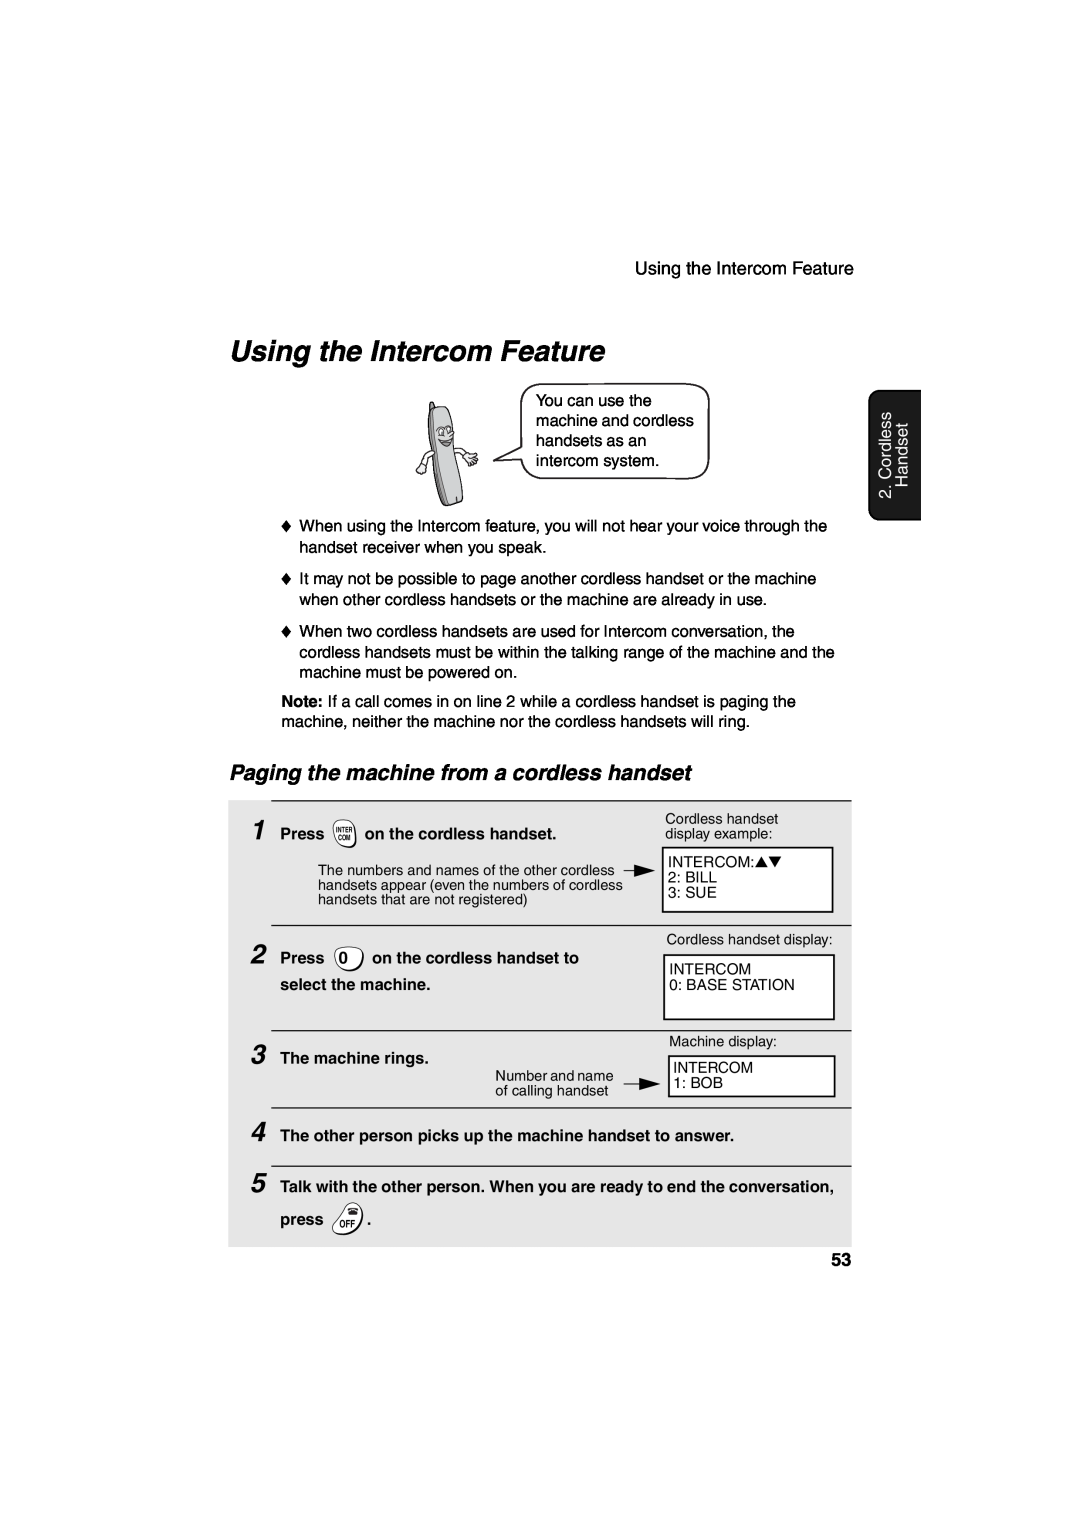 Sharp UX-CD600 operation manual Using the Intercom Feature, Paging the machine from a cordless handset, Cordless Handset 